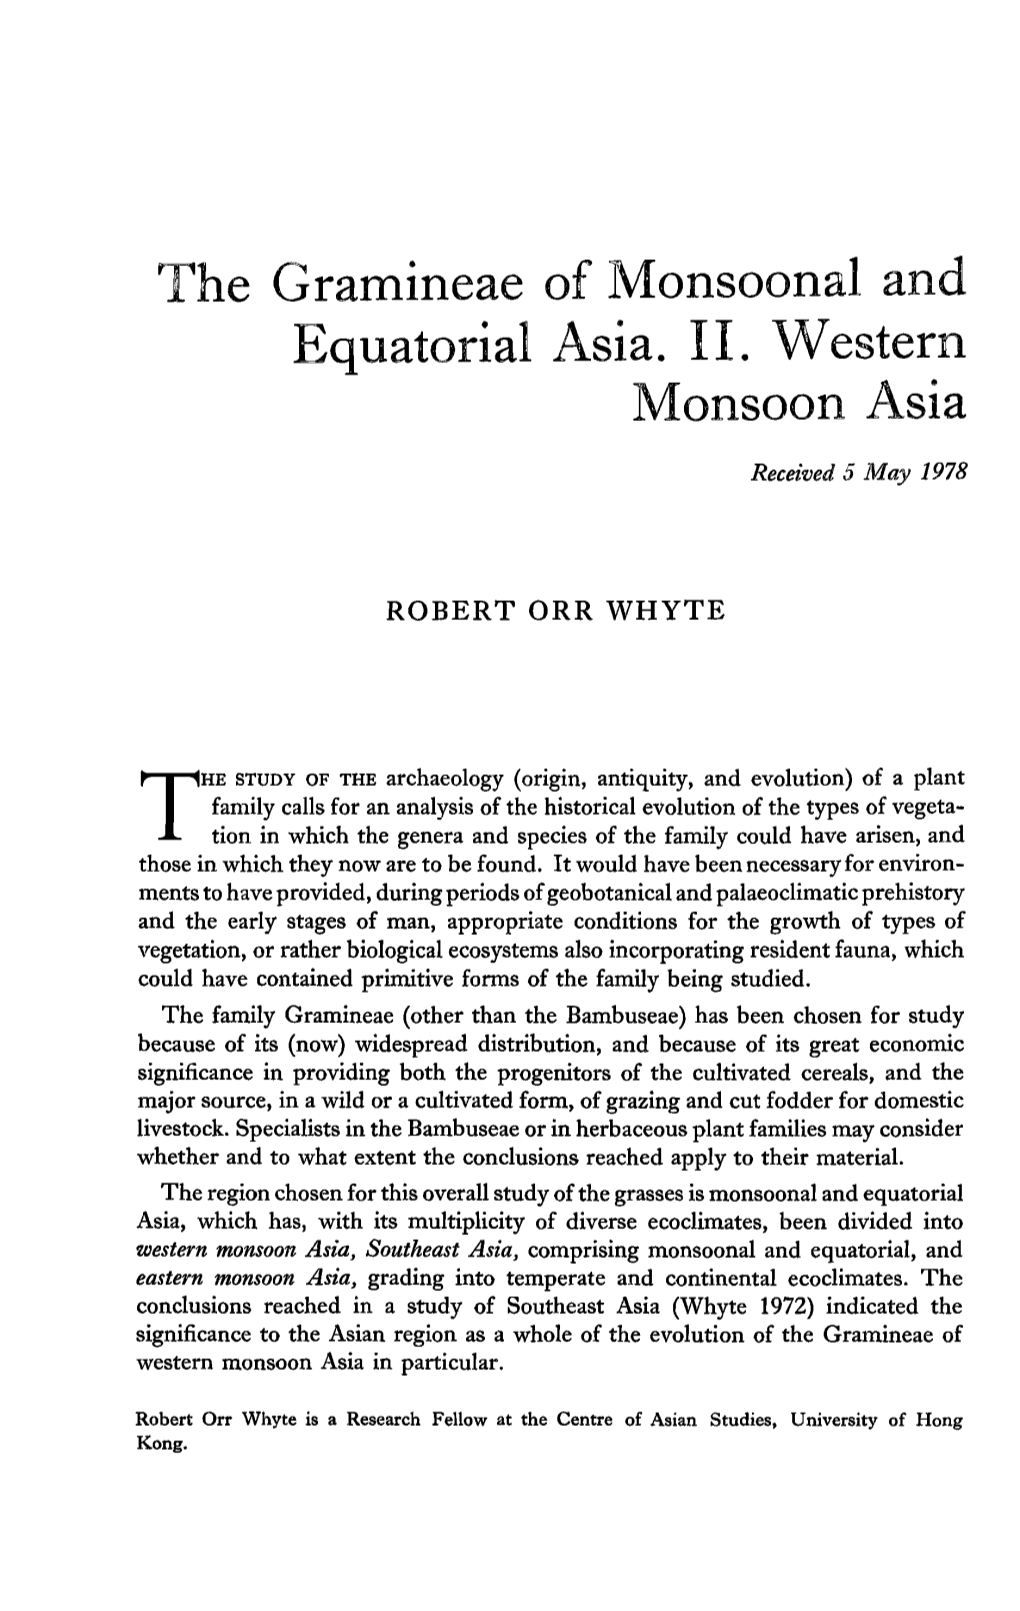 The Gramineae of Monsoonal and Equatorial Asia. II. Western Monsoon Asia